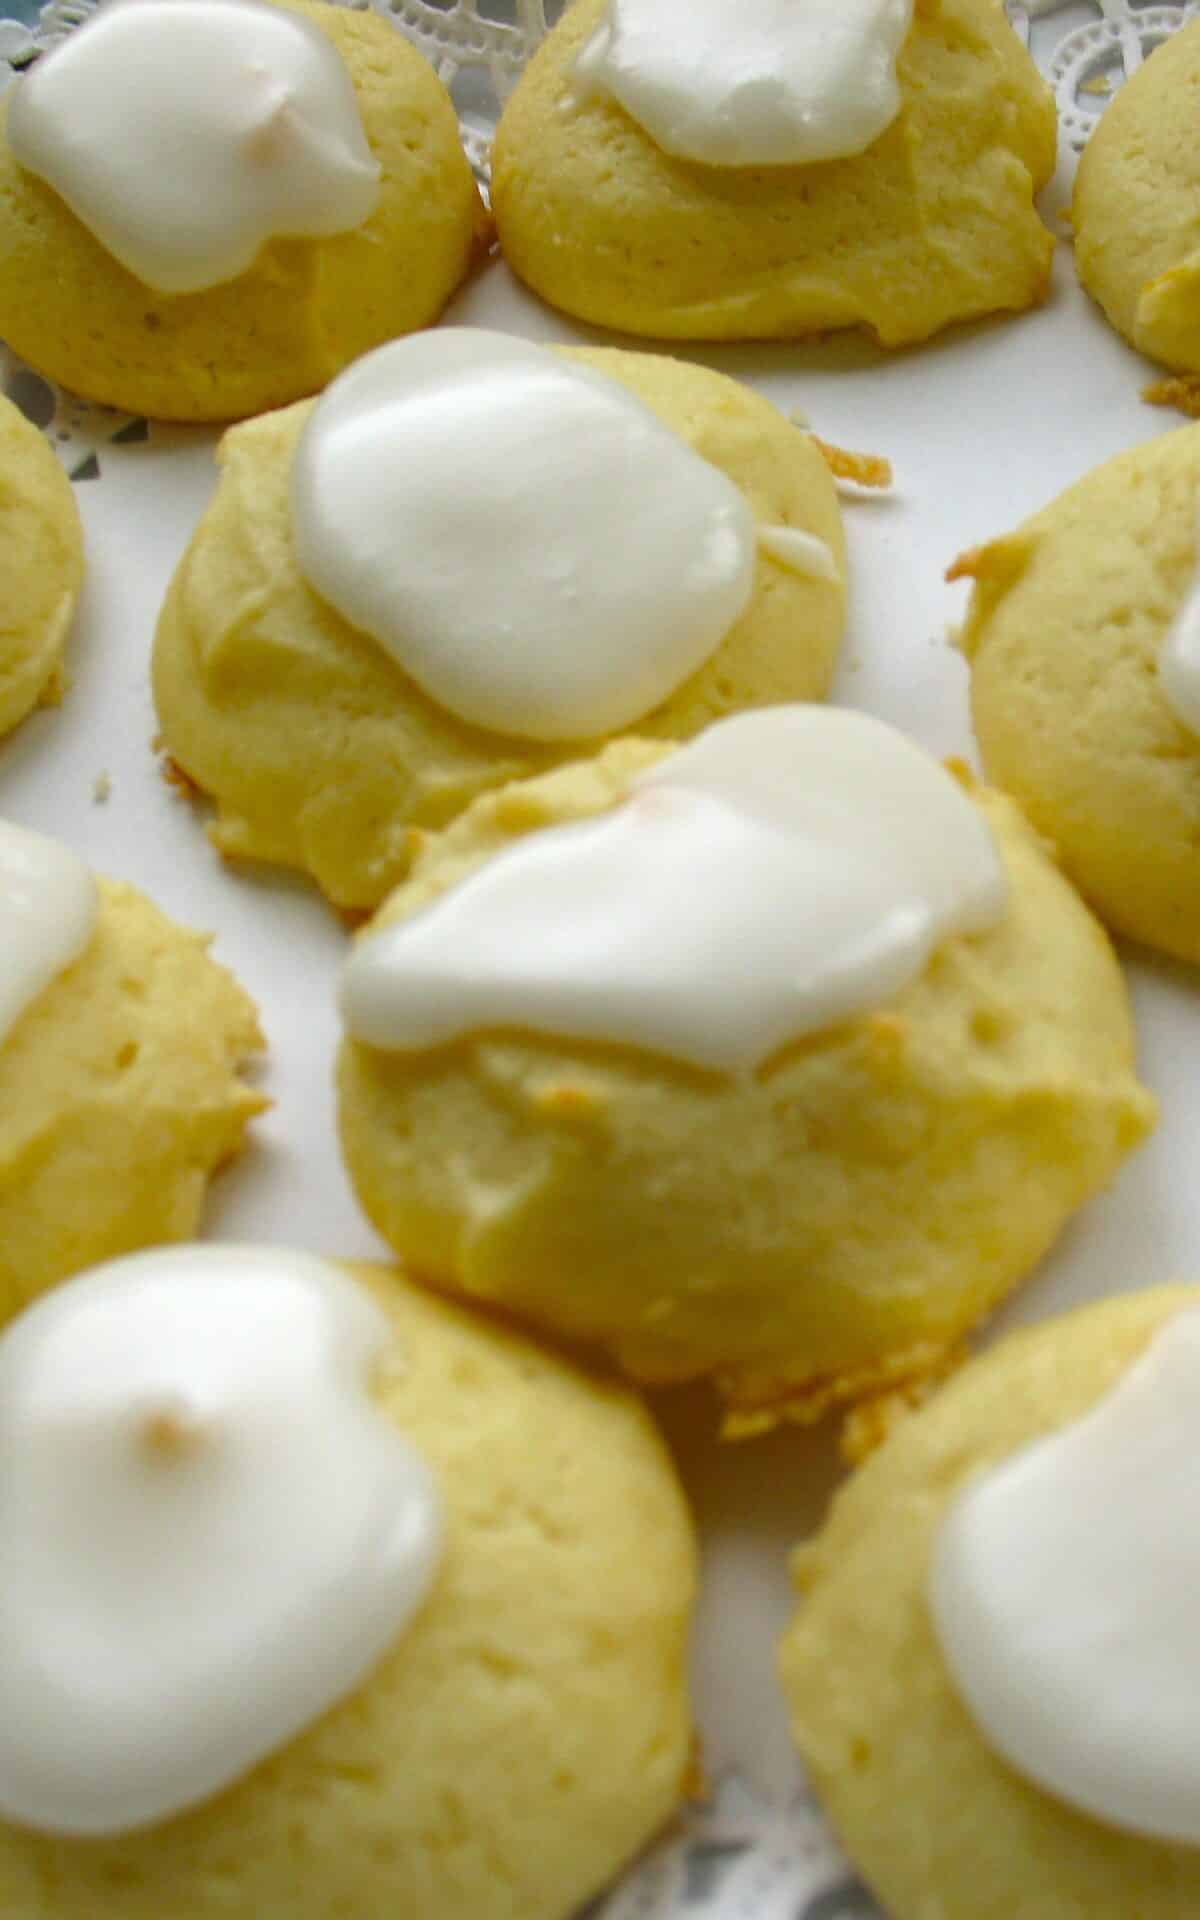  Ricotta cheese is the secret ingredient for the perfect soft and fluffy cookie texture.